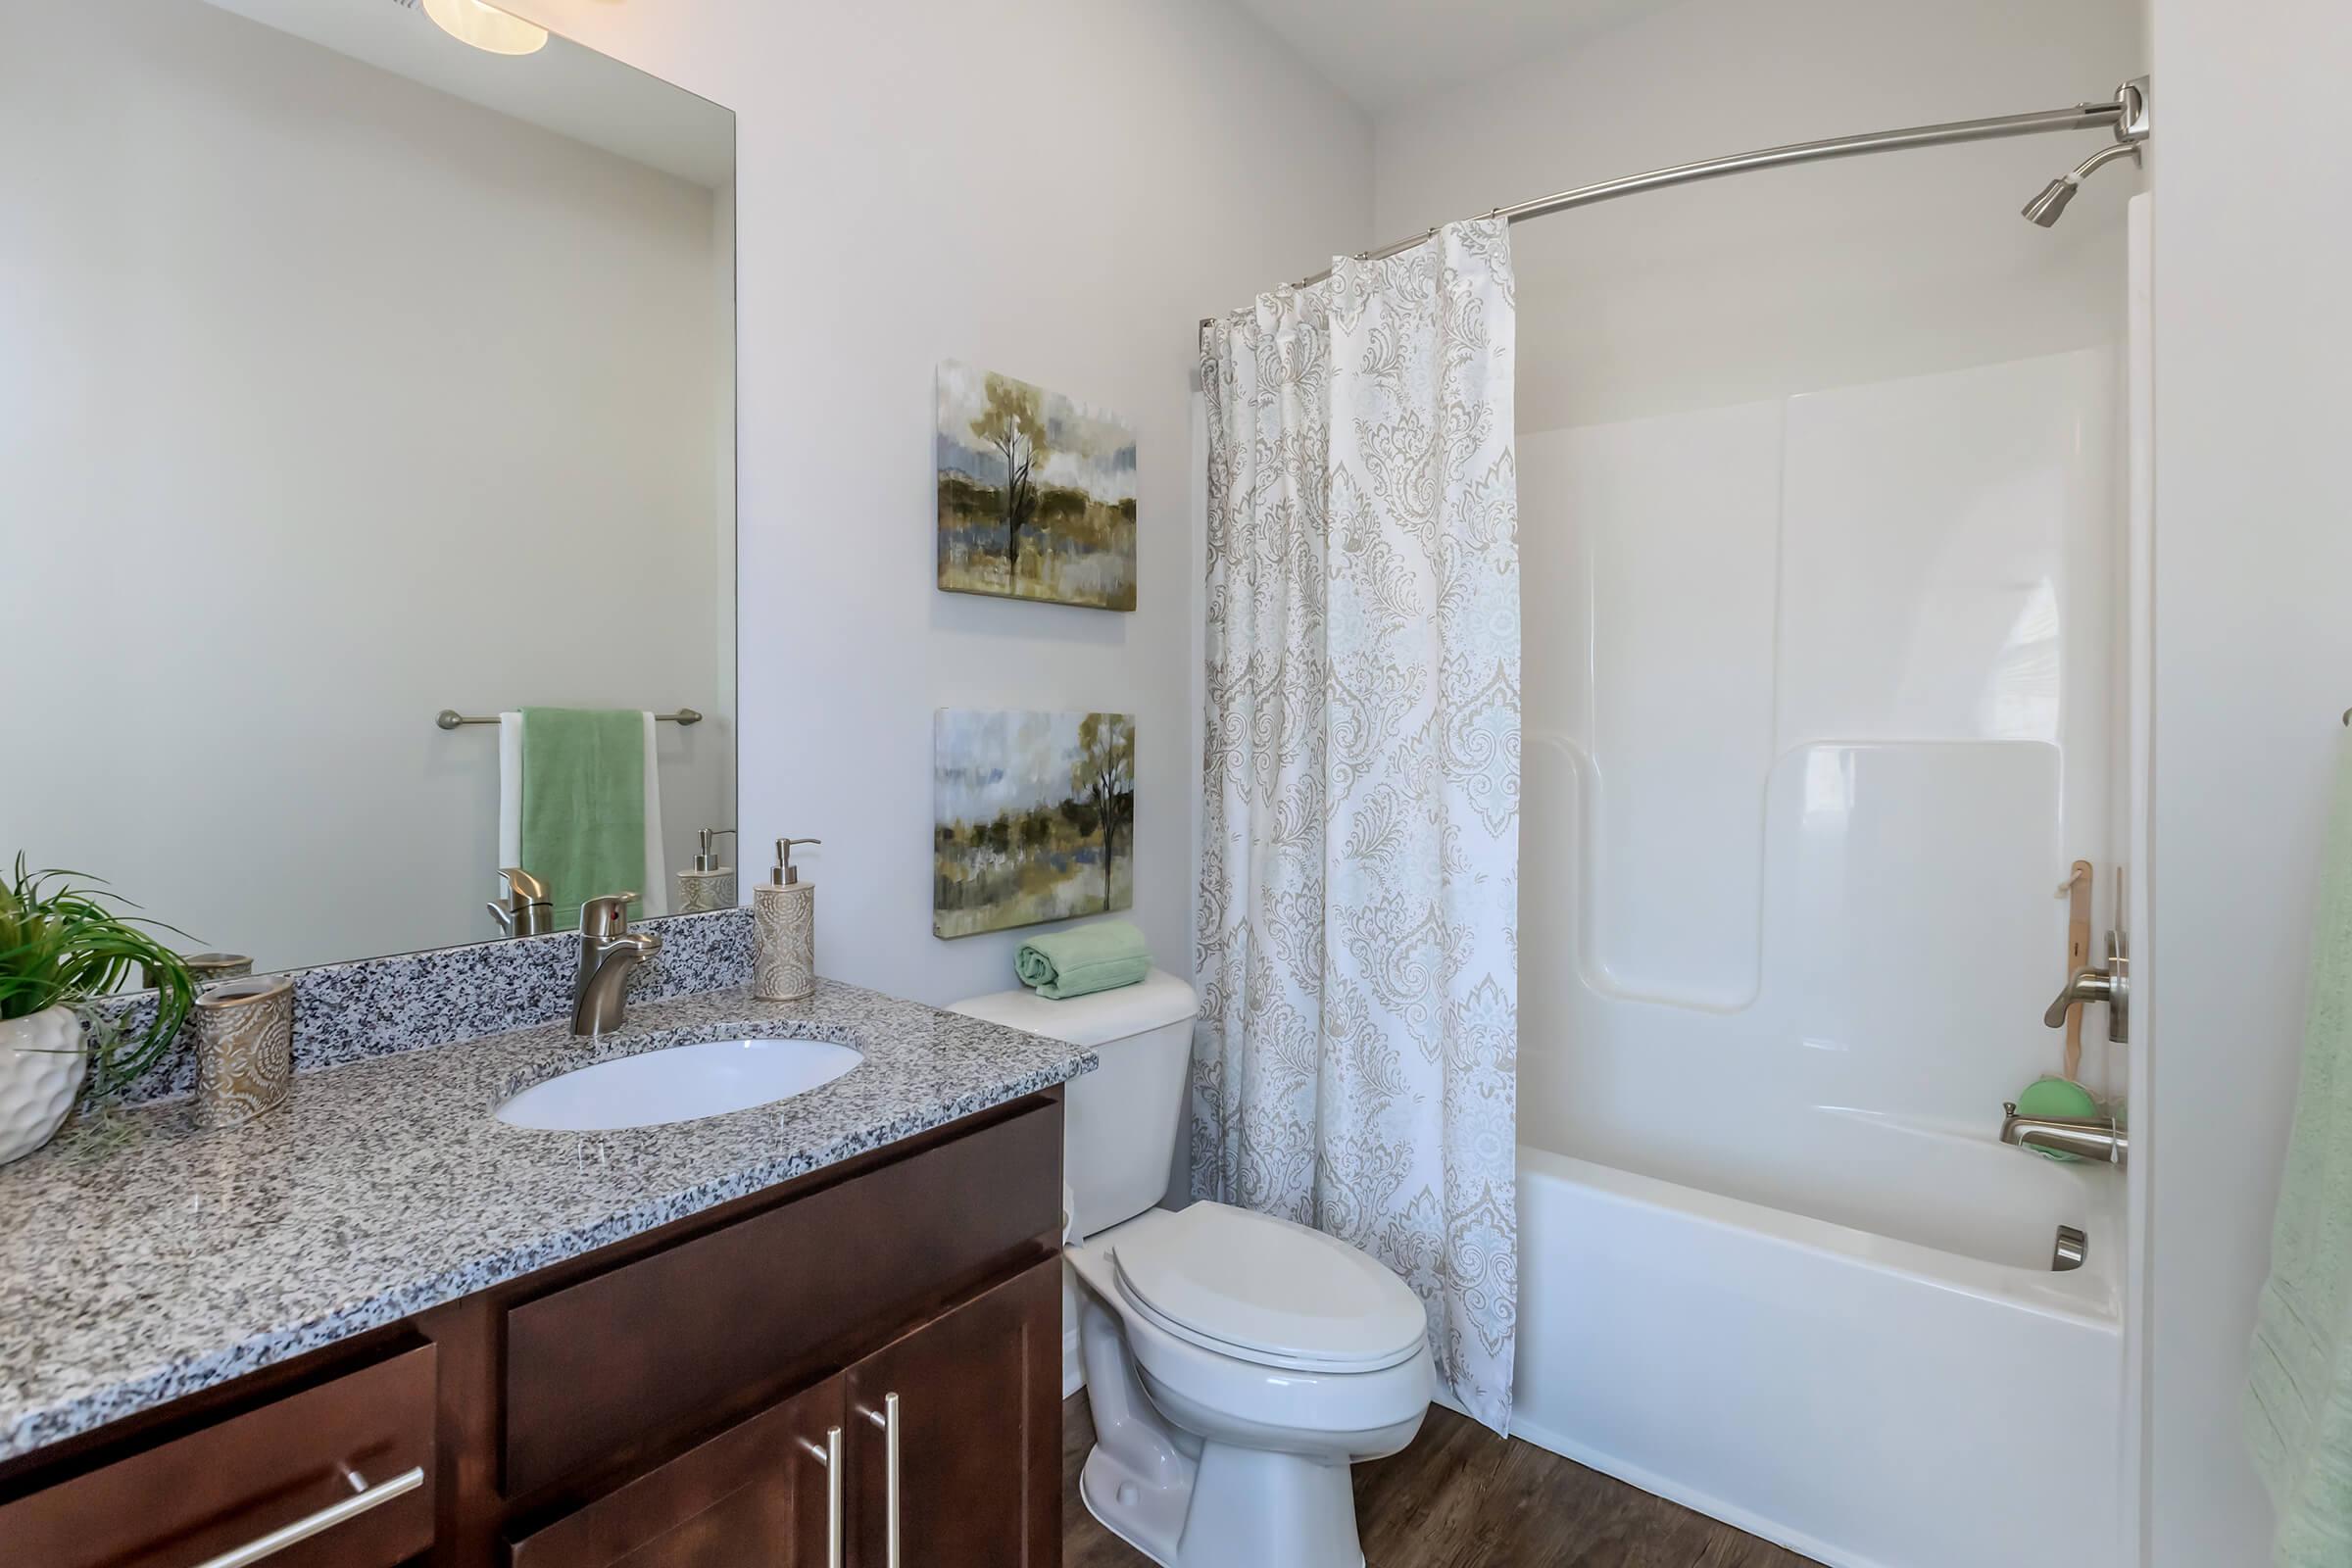 Getting Ready Has Never Been Easier at Riverstone Apartments At Long Shoals in Arden, NC